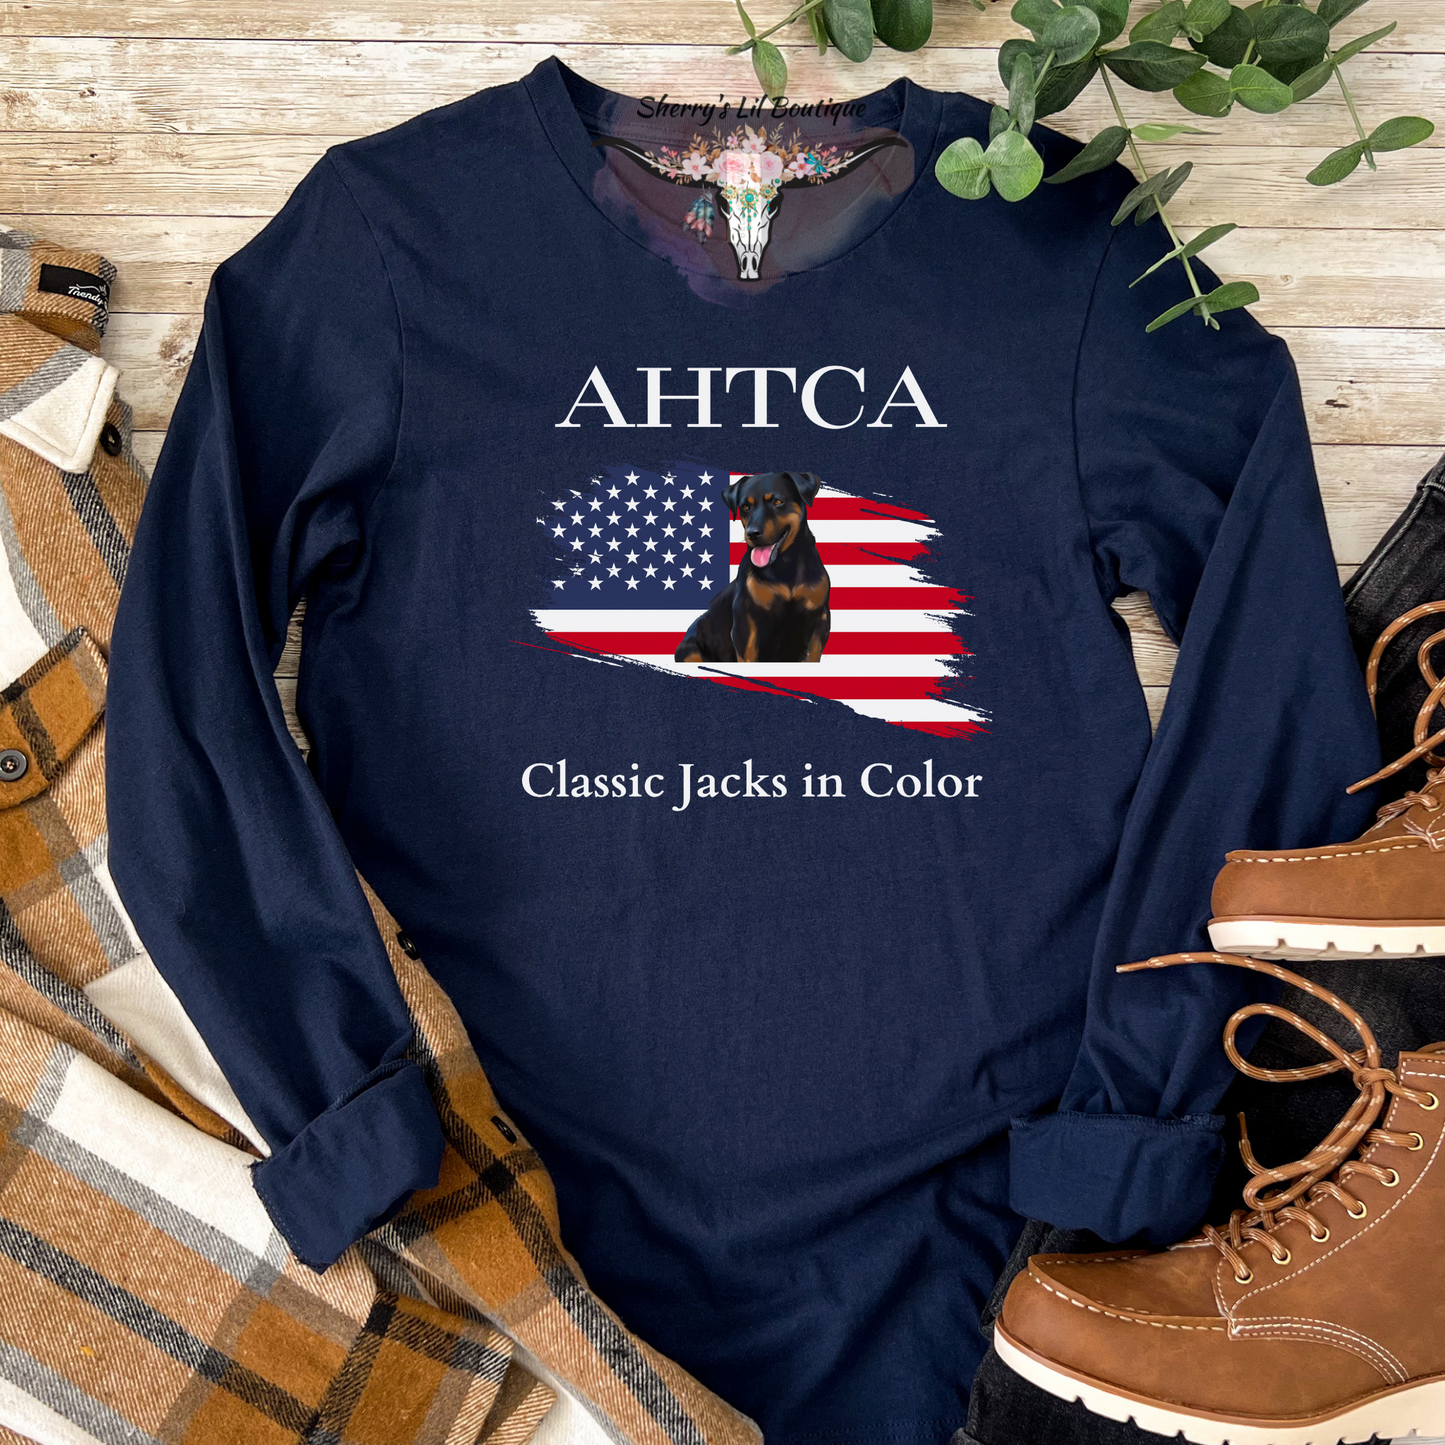 Navy long sleeve tee with AHTCA graphic design